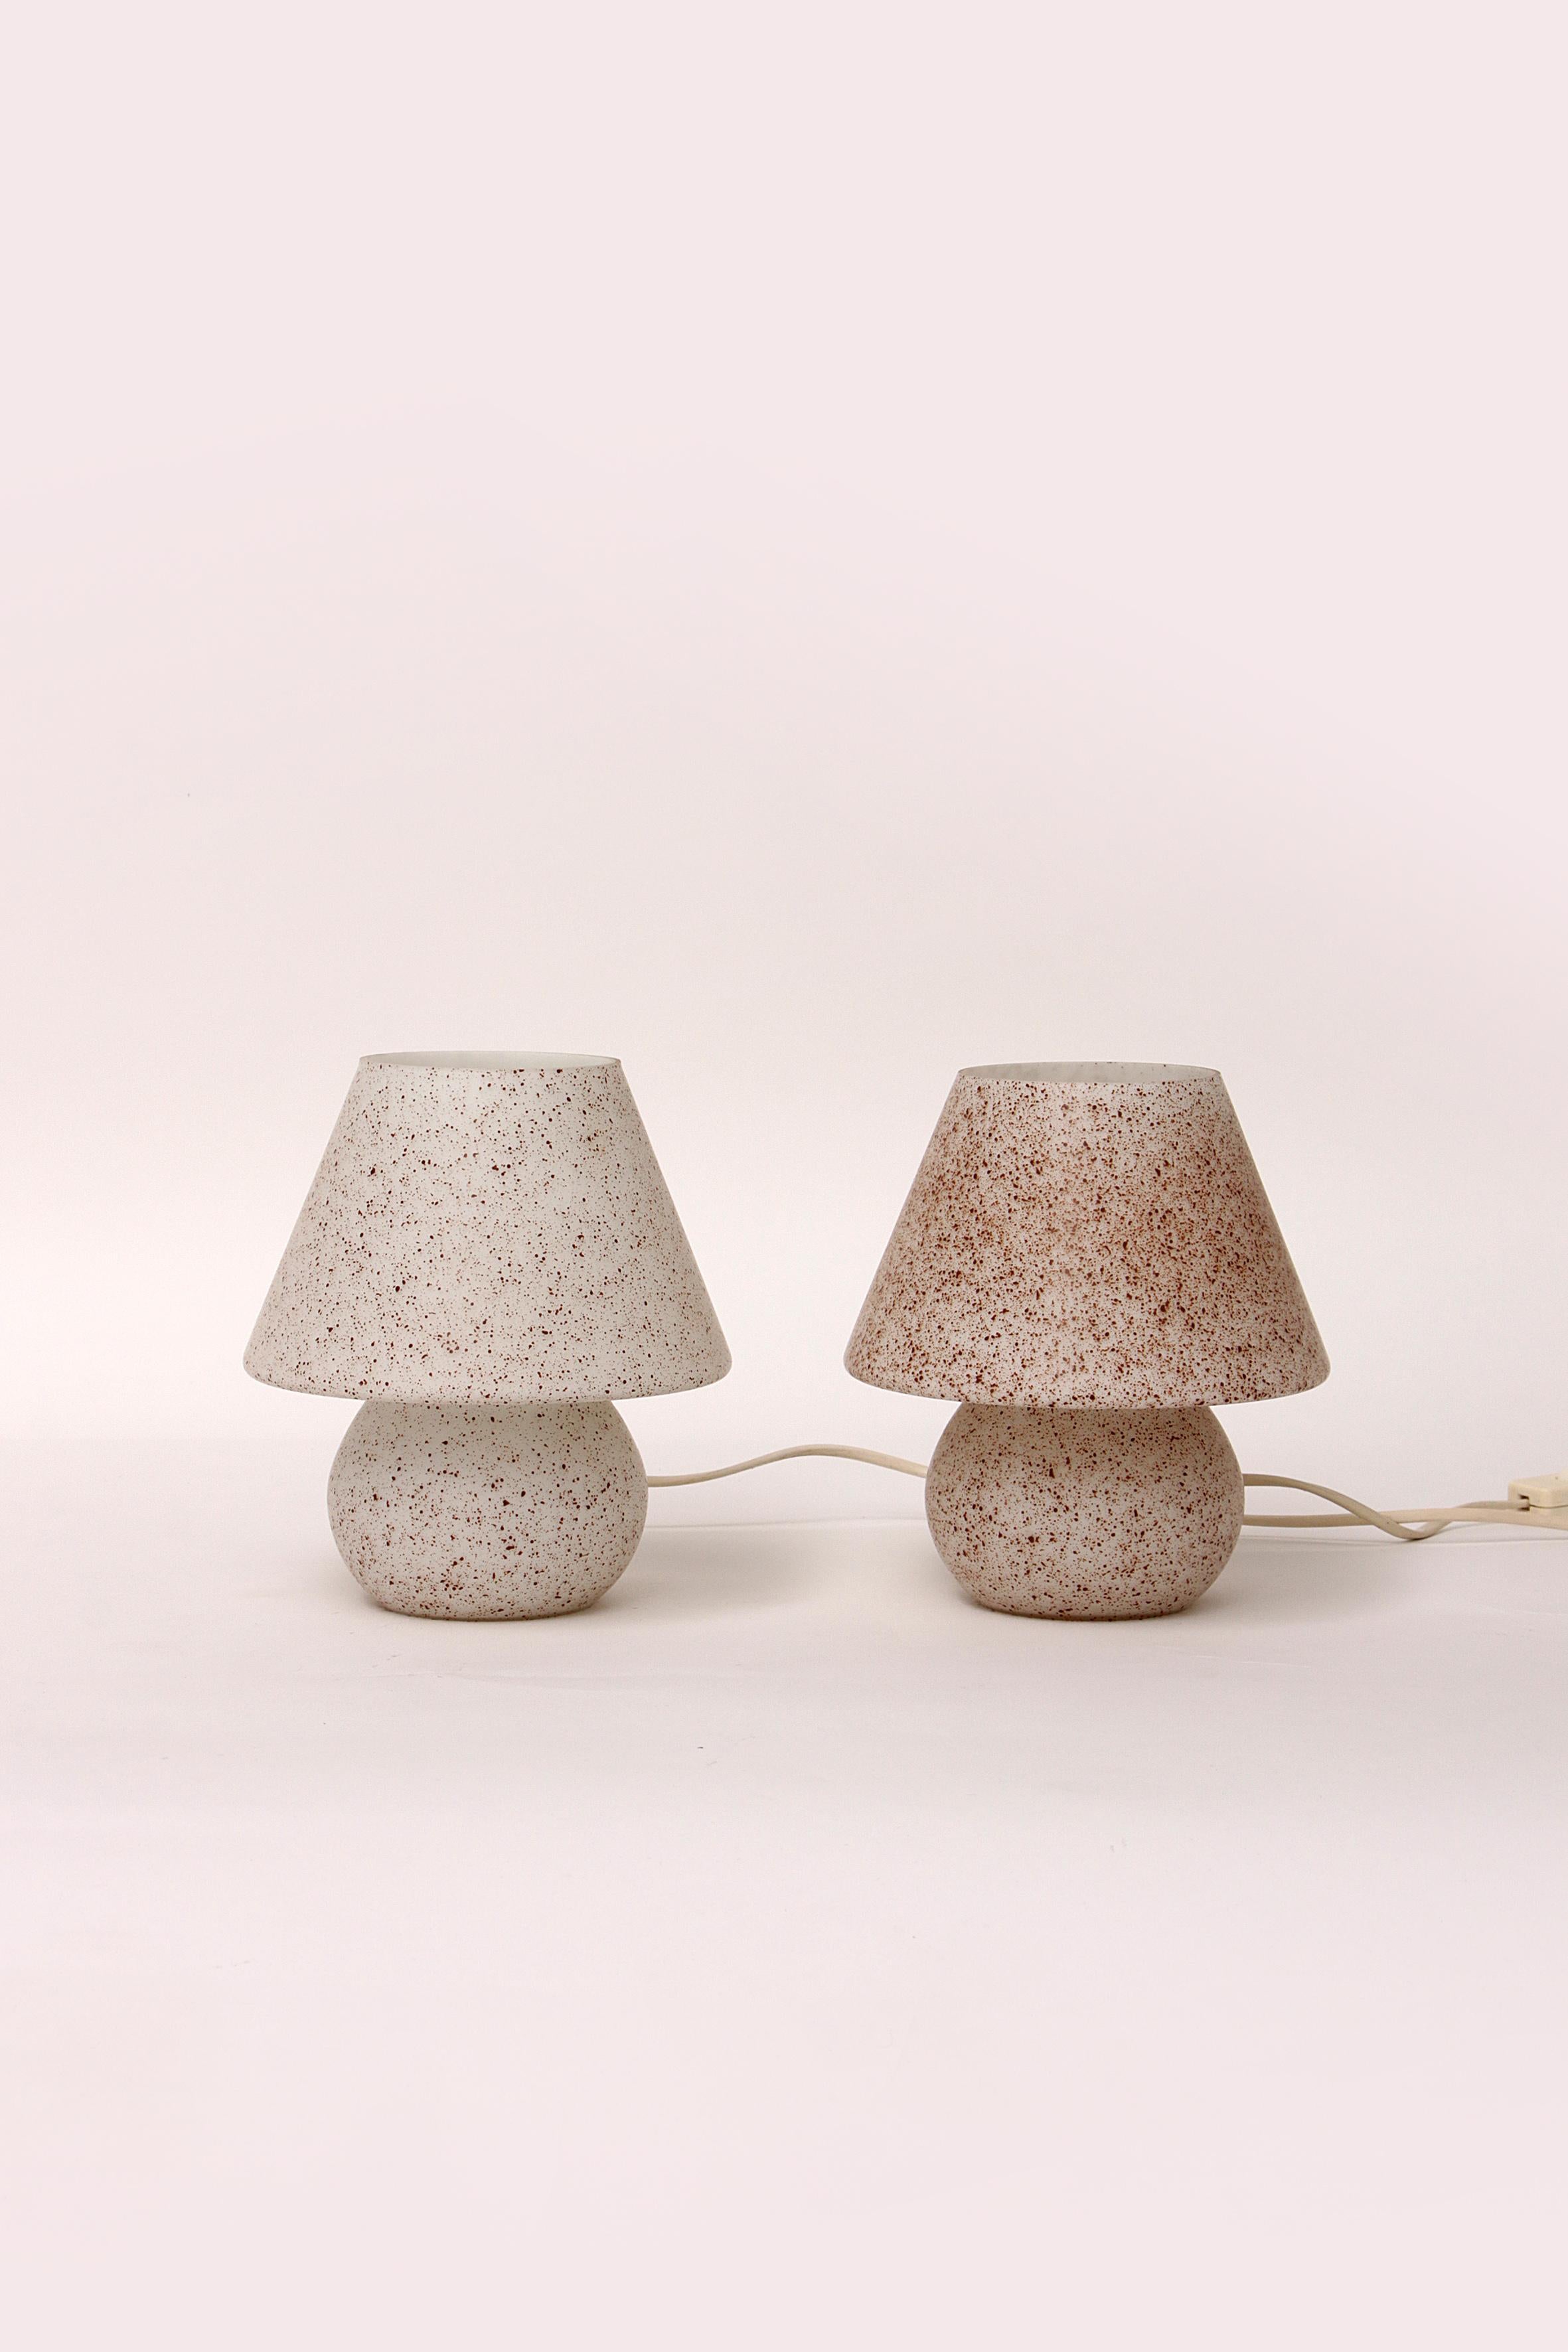 These are 2 beautiful glass Mushroom or Champignon table lamps with switch ideal as bedside lamps but also beautiful in your living room.

There are small fittings in the e14 bulbs.

There is a beautiful brown speckle on the glass, when the lamp